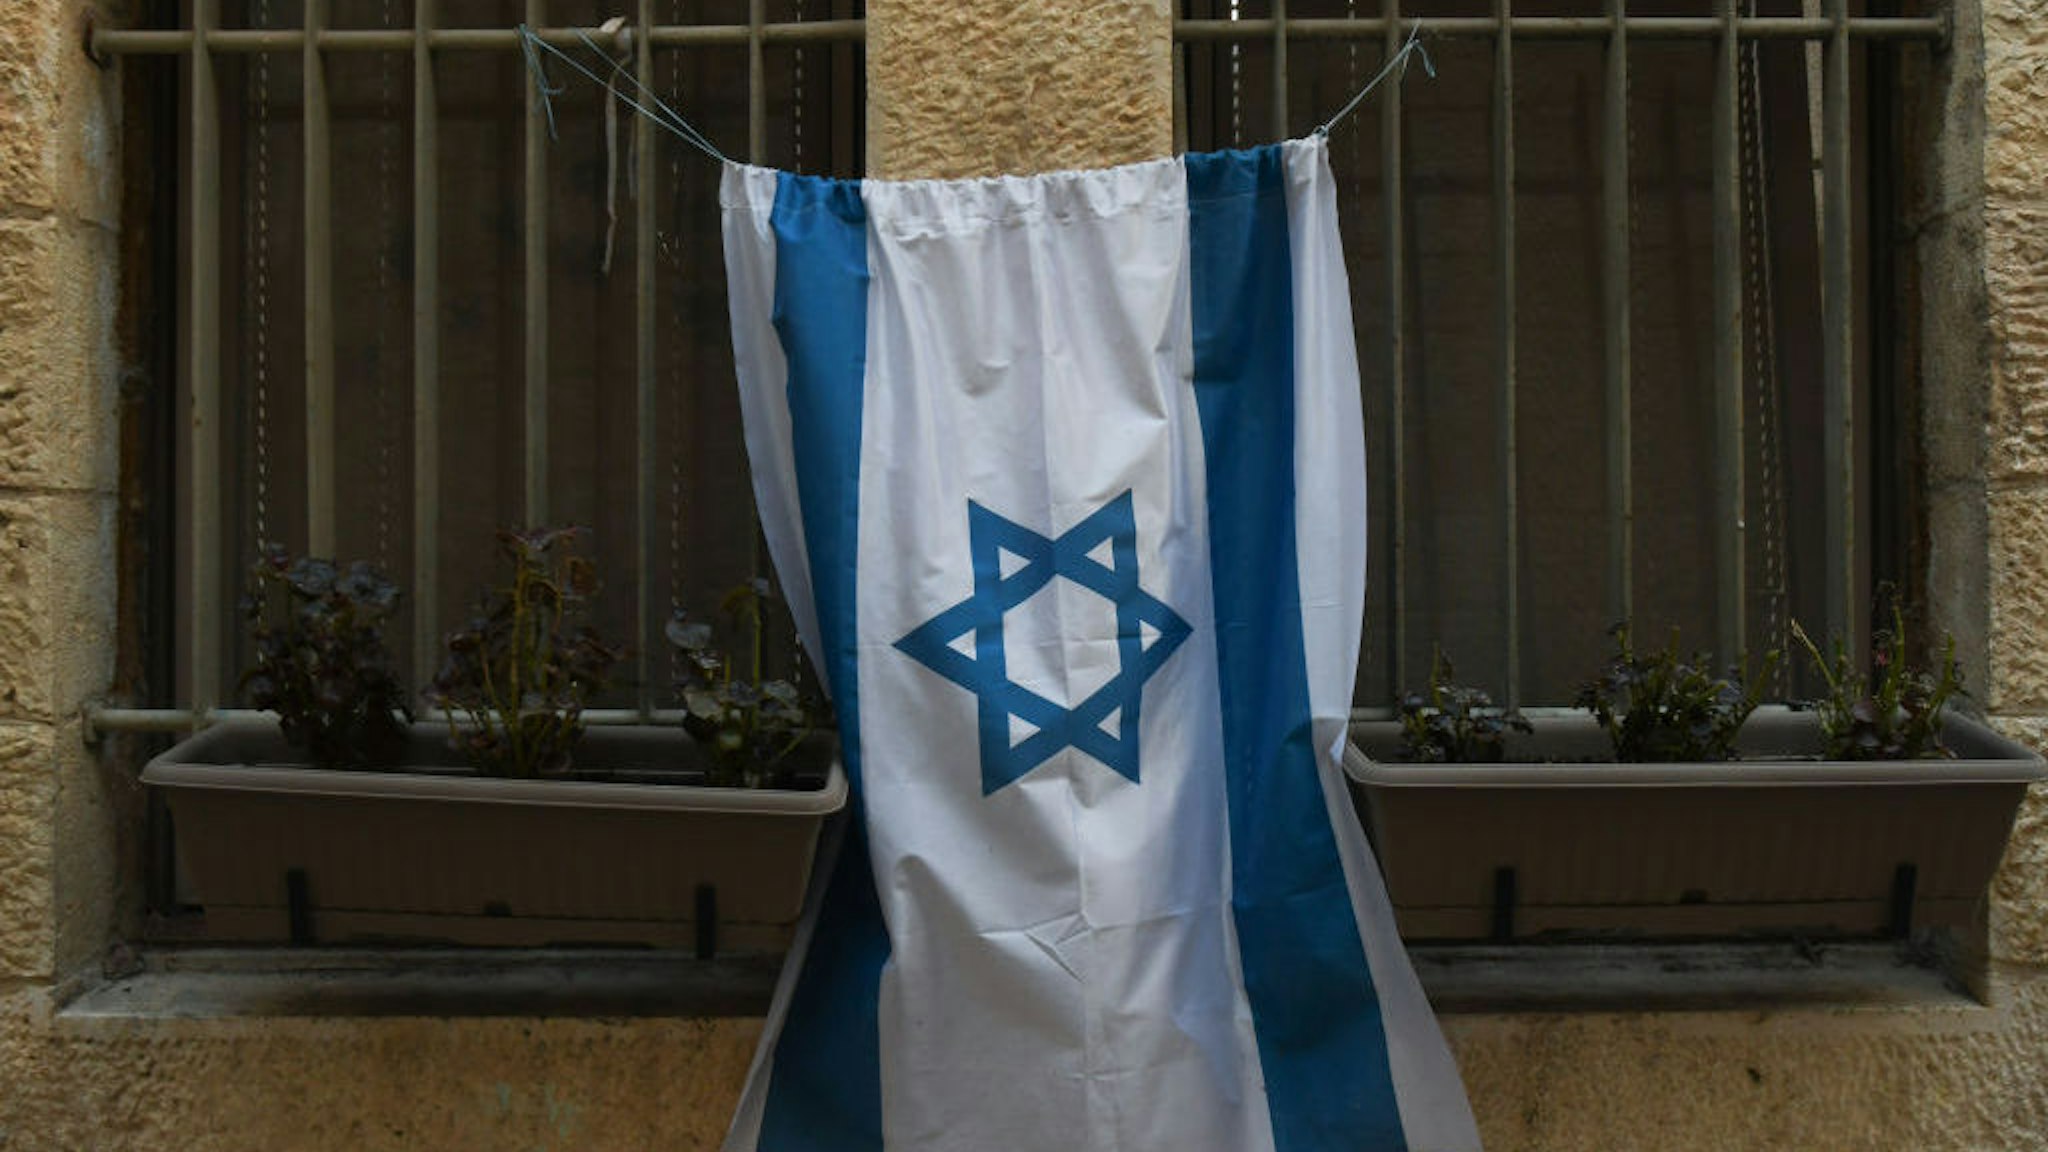 An Israeli flag seen on a house in Jerusalem's Old City. On Friday, February 28, 2020, in Jerusalem, Israel. (Photo by Artur Widak/NurPhoto via Getty Images)